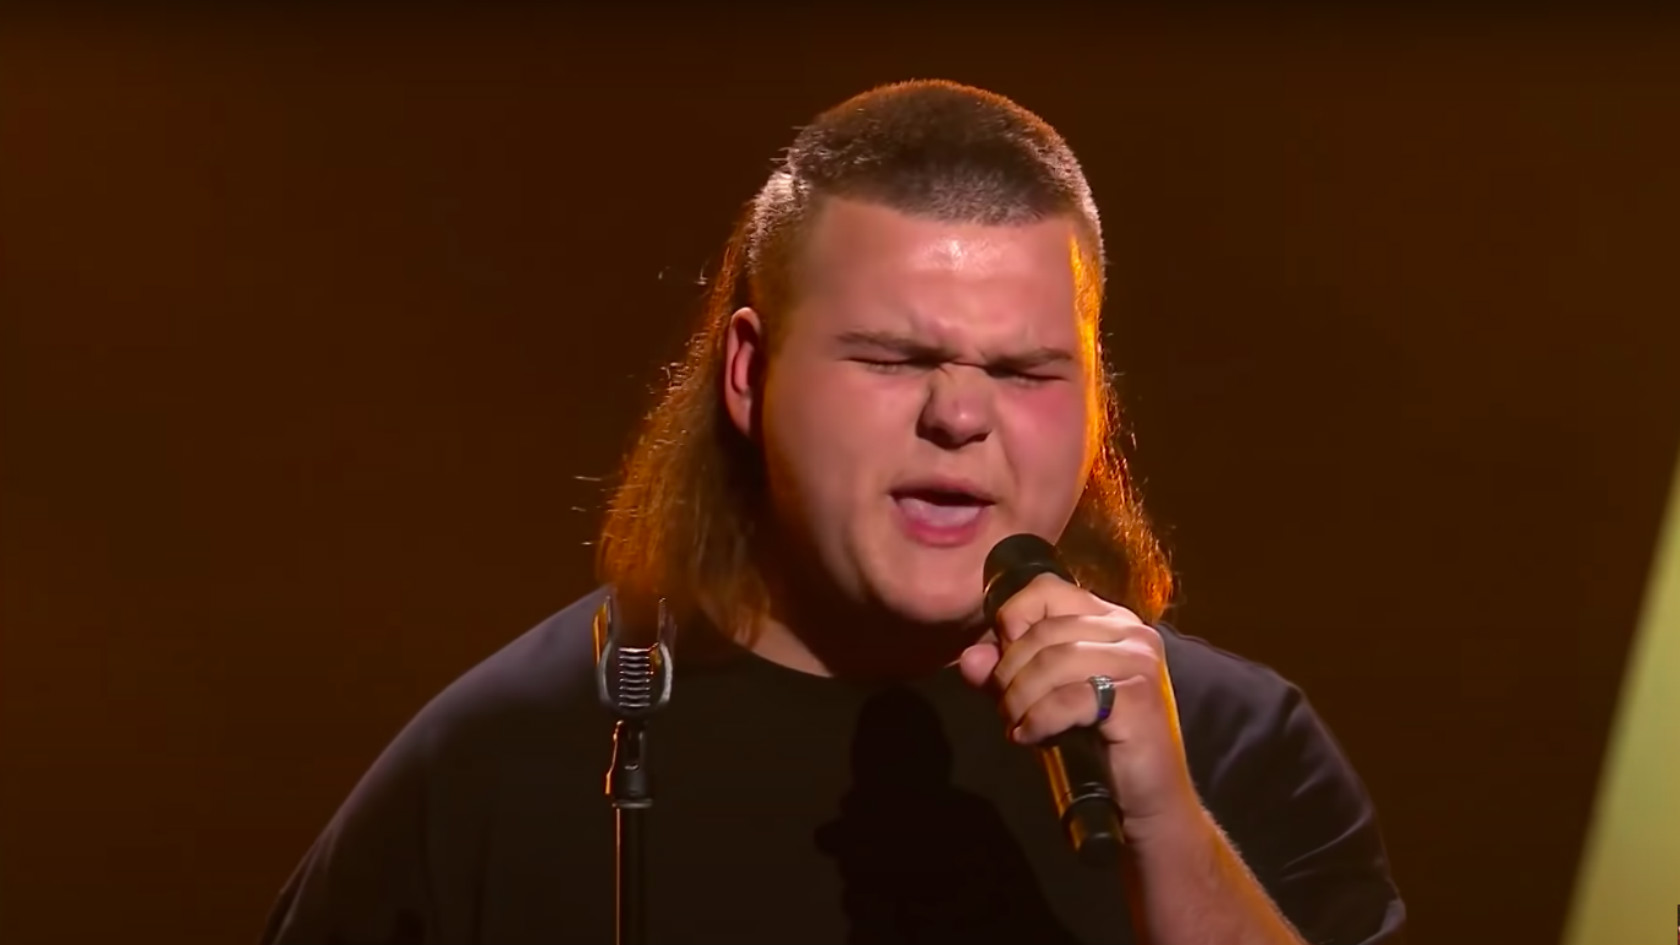 16-Year-Old Mullet Lord From 'The Voice' Is Our New Hero | lifewithoutandy